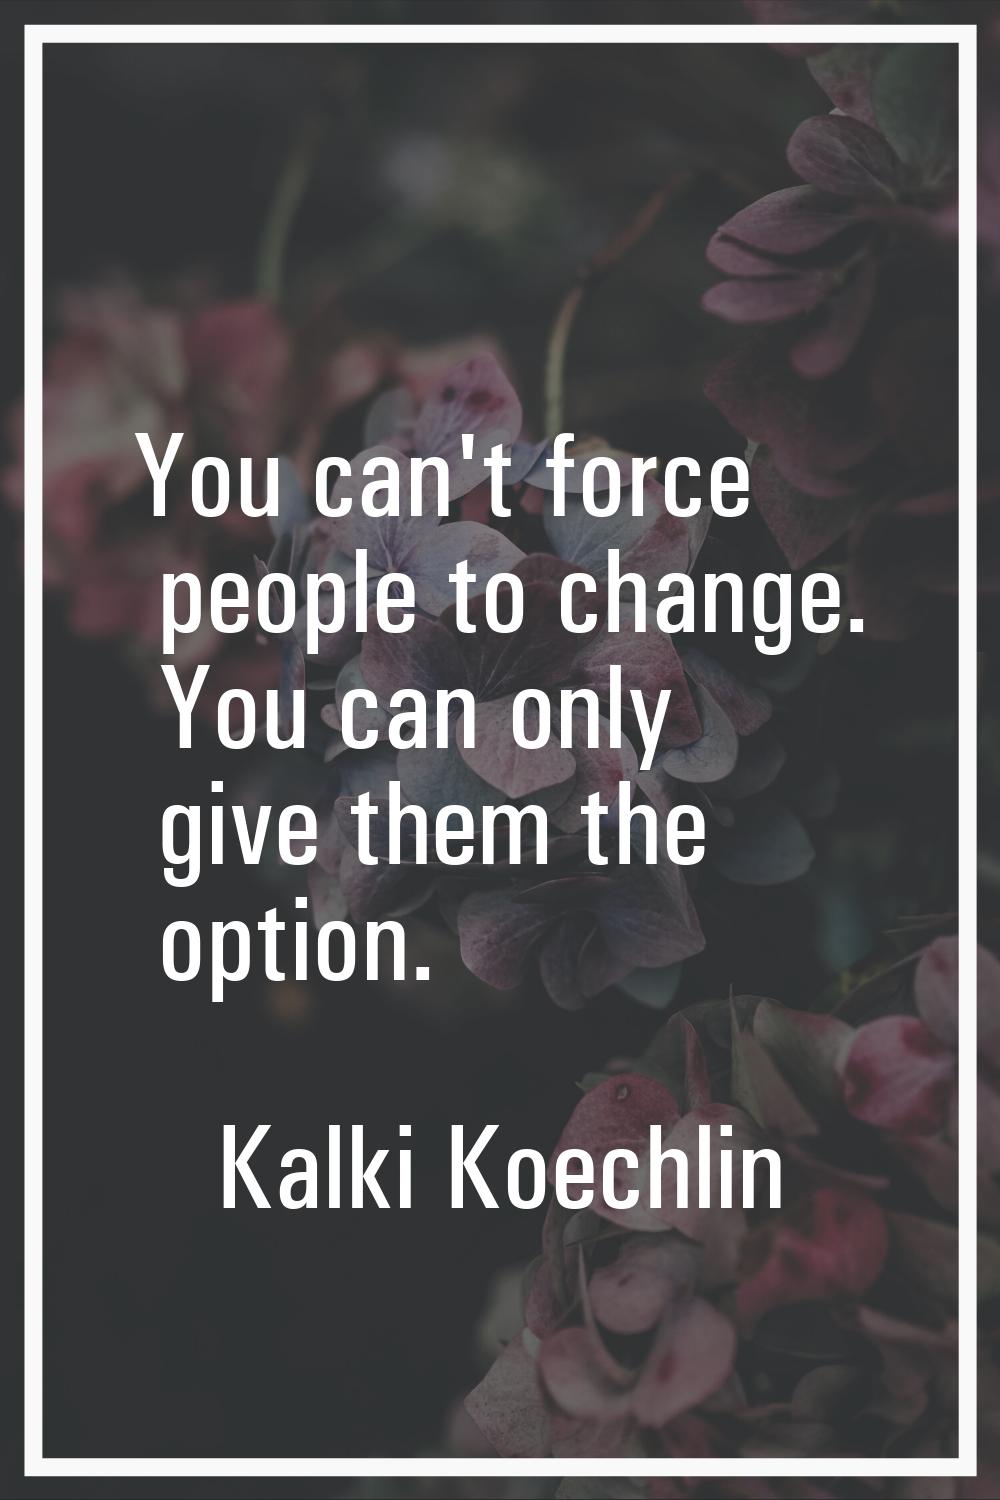 You can't force people to change. You can only give them the option.